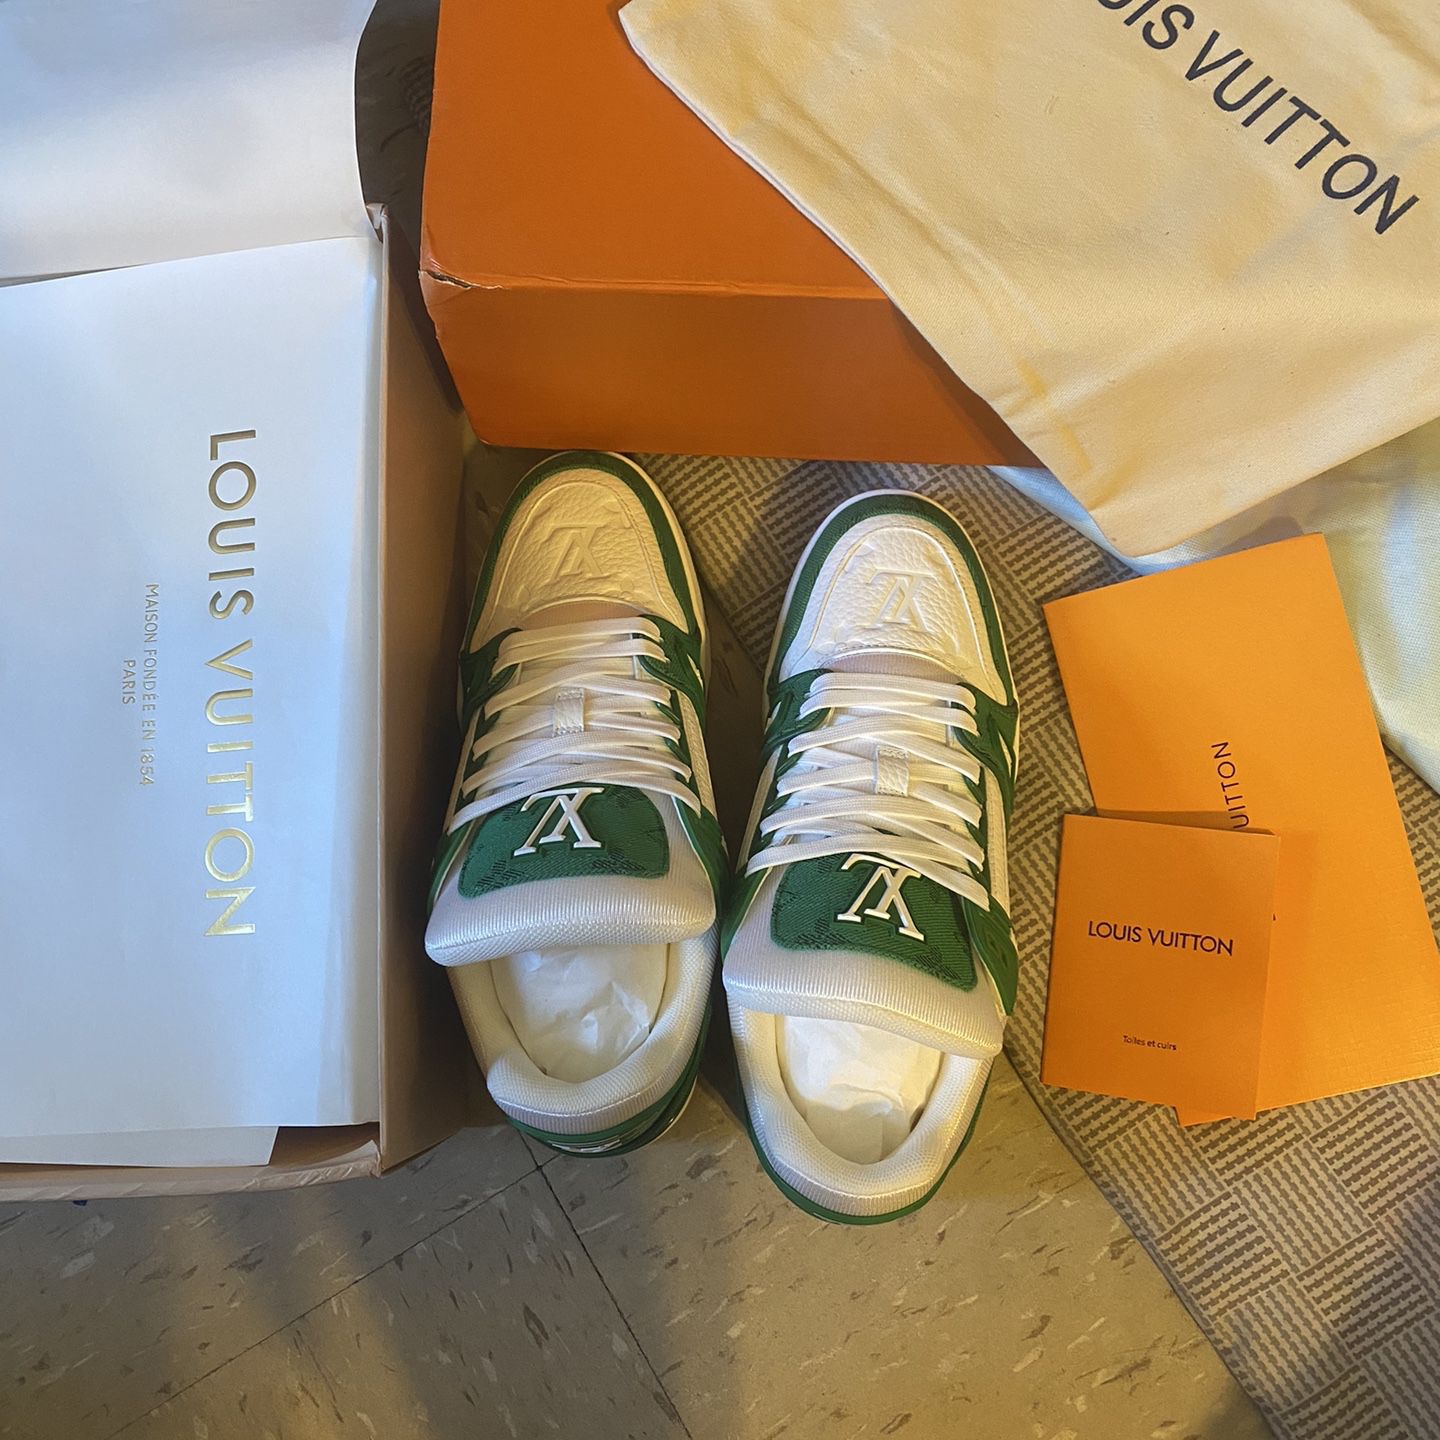 Louis Vuitton Trainer 49 for Sale in Staten Island, NY - OfferUp